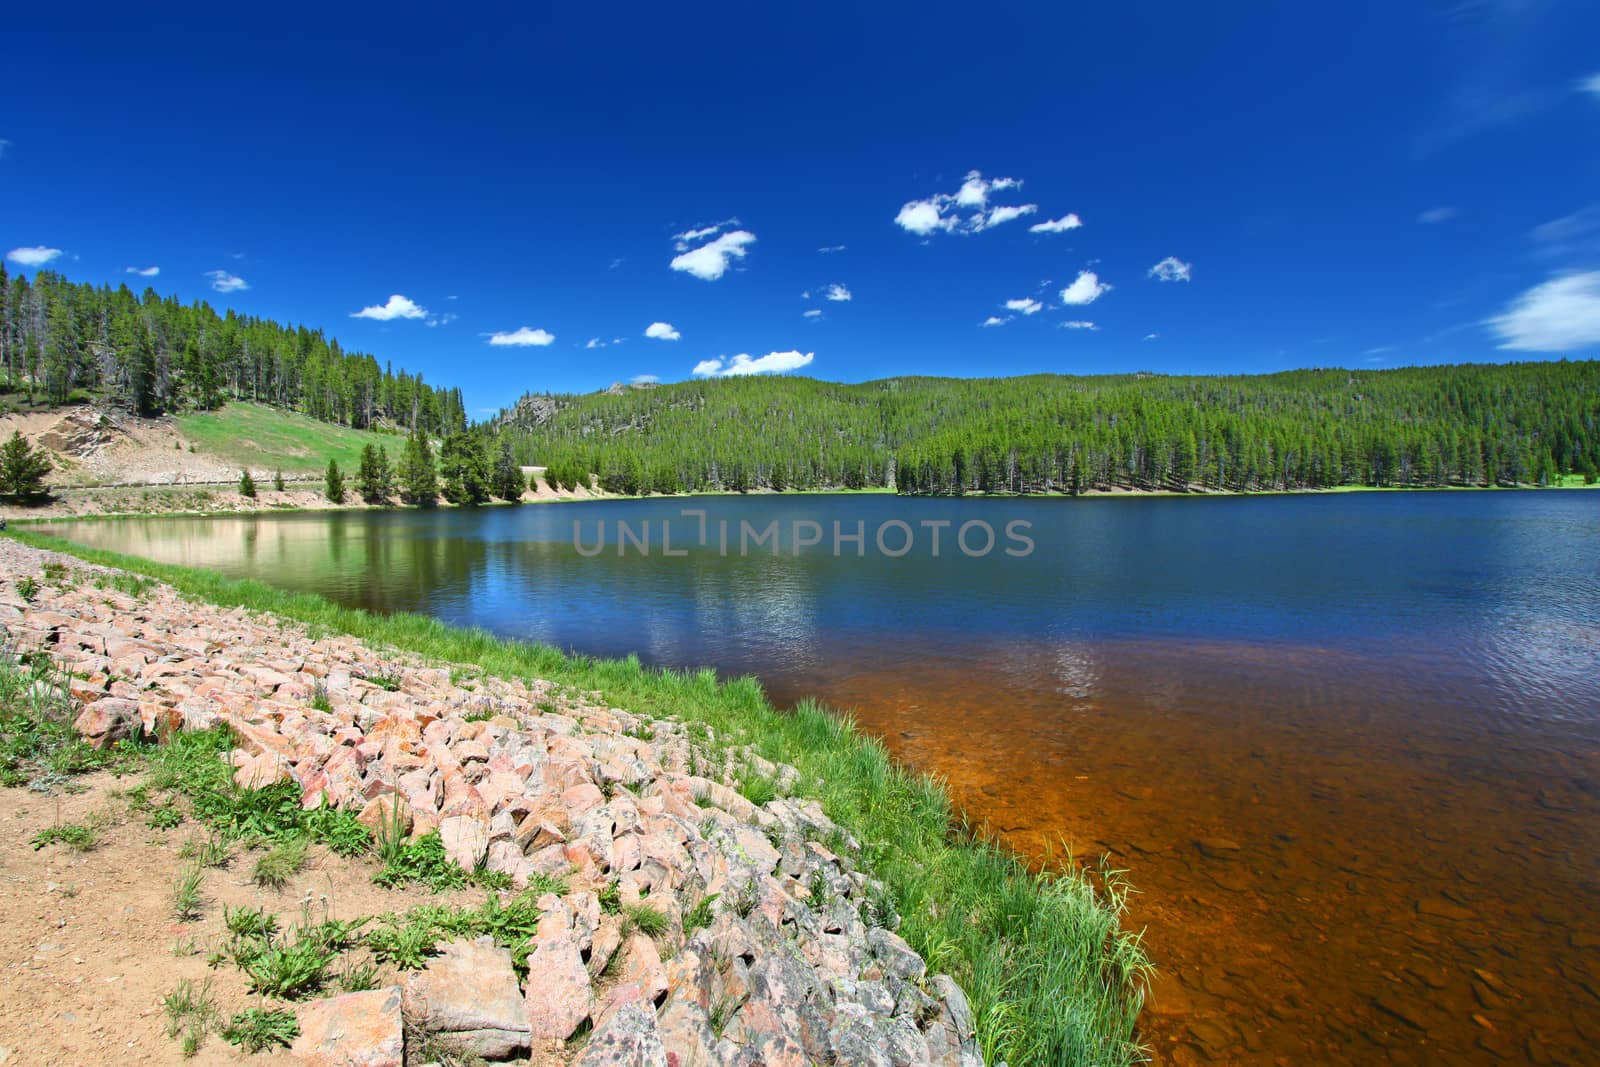 Grass grows along Sibley Lake in the Bighorn National Forest of Wyoming.